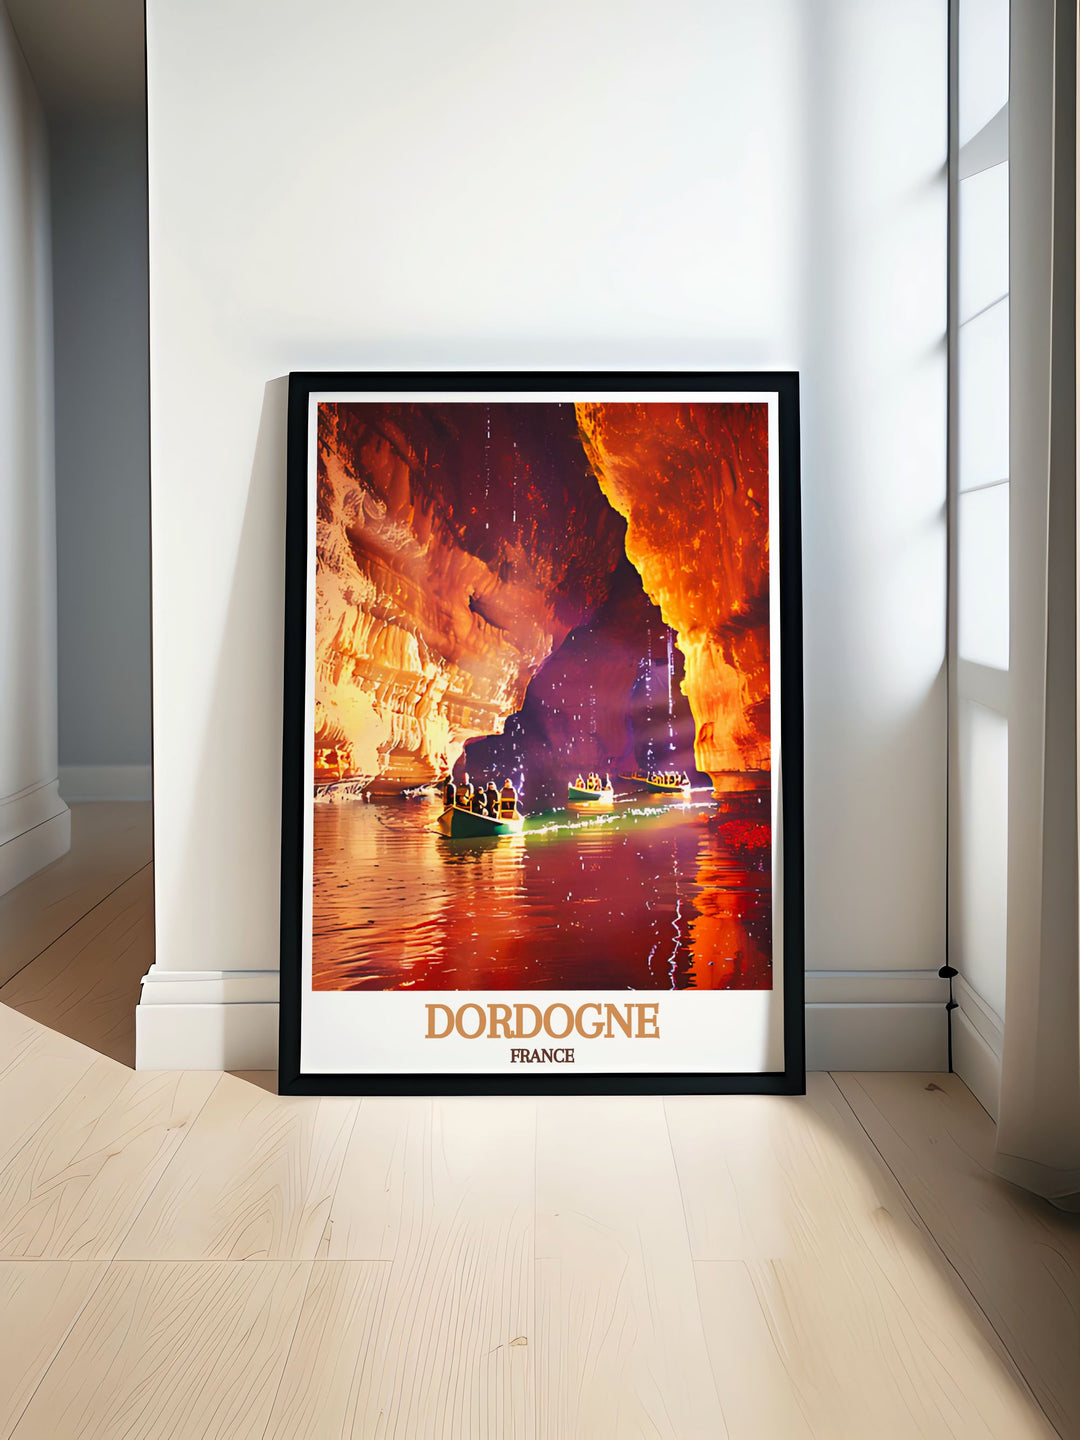 The picturesque landscapes of Dordogne are depicted in this poster, offering a glimpse into the regions stunning natural beauty and inviting you to explore its scenic wonders.